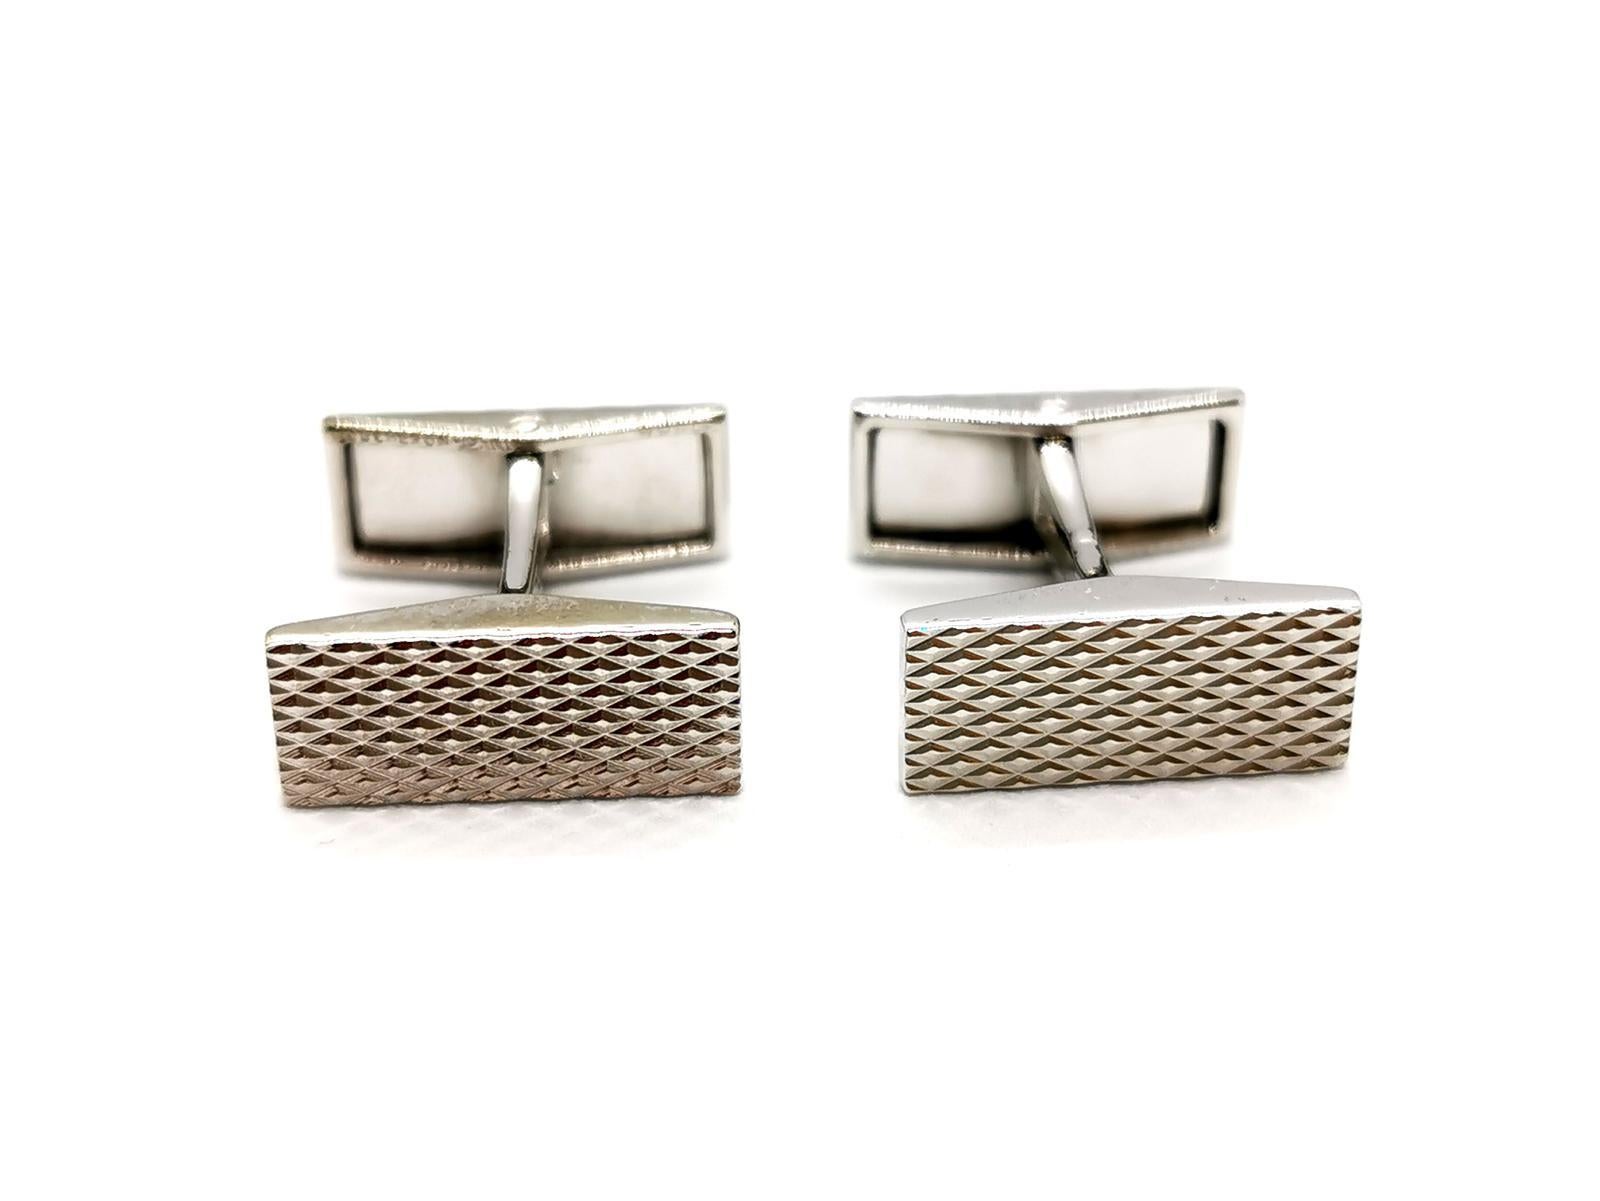 Cufflinks. signed by Maison Boucheron. in 750 thousandths (18K) white gold. diamond point motif. length: 1.66 cm. width: 0.70 cm. total weight: 8.97 g. stamped head eagle. excellent condition.
